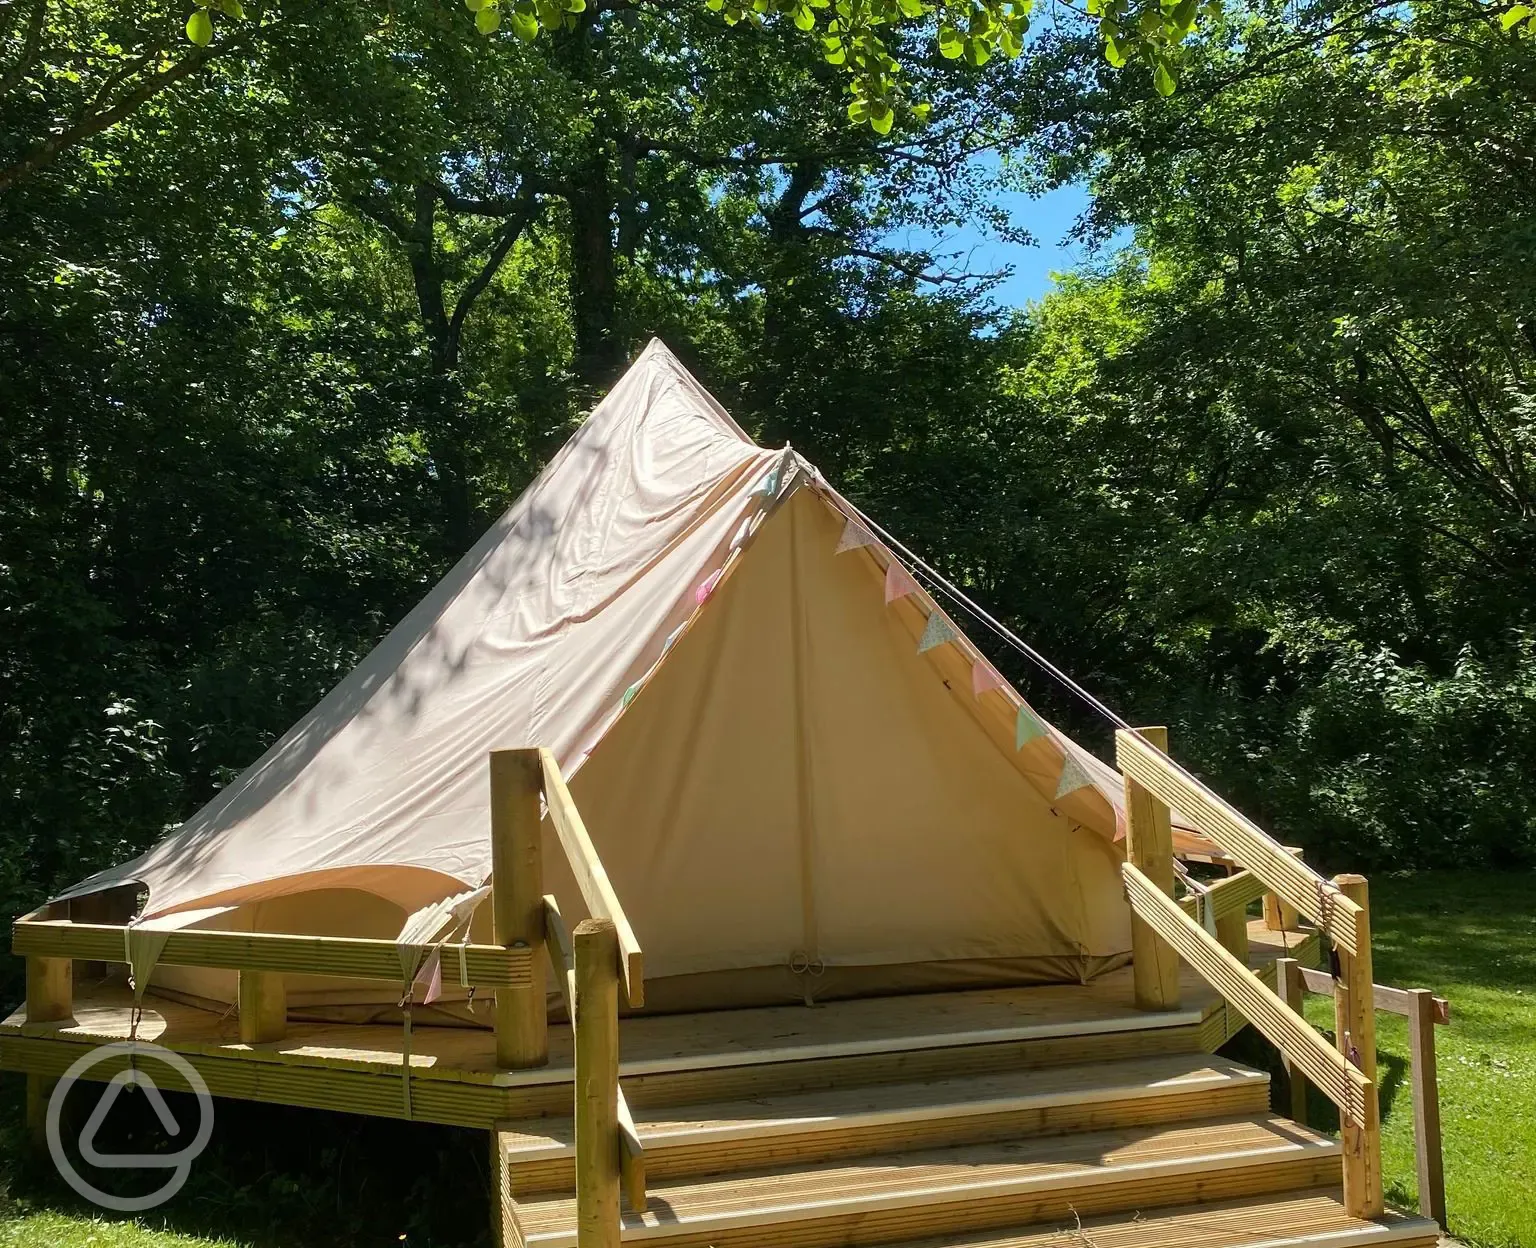 Bell tent at Rivendell